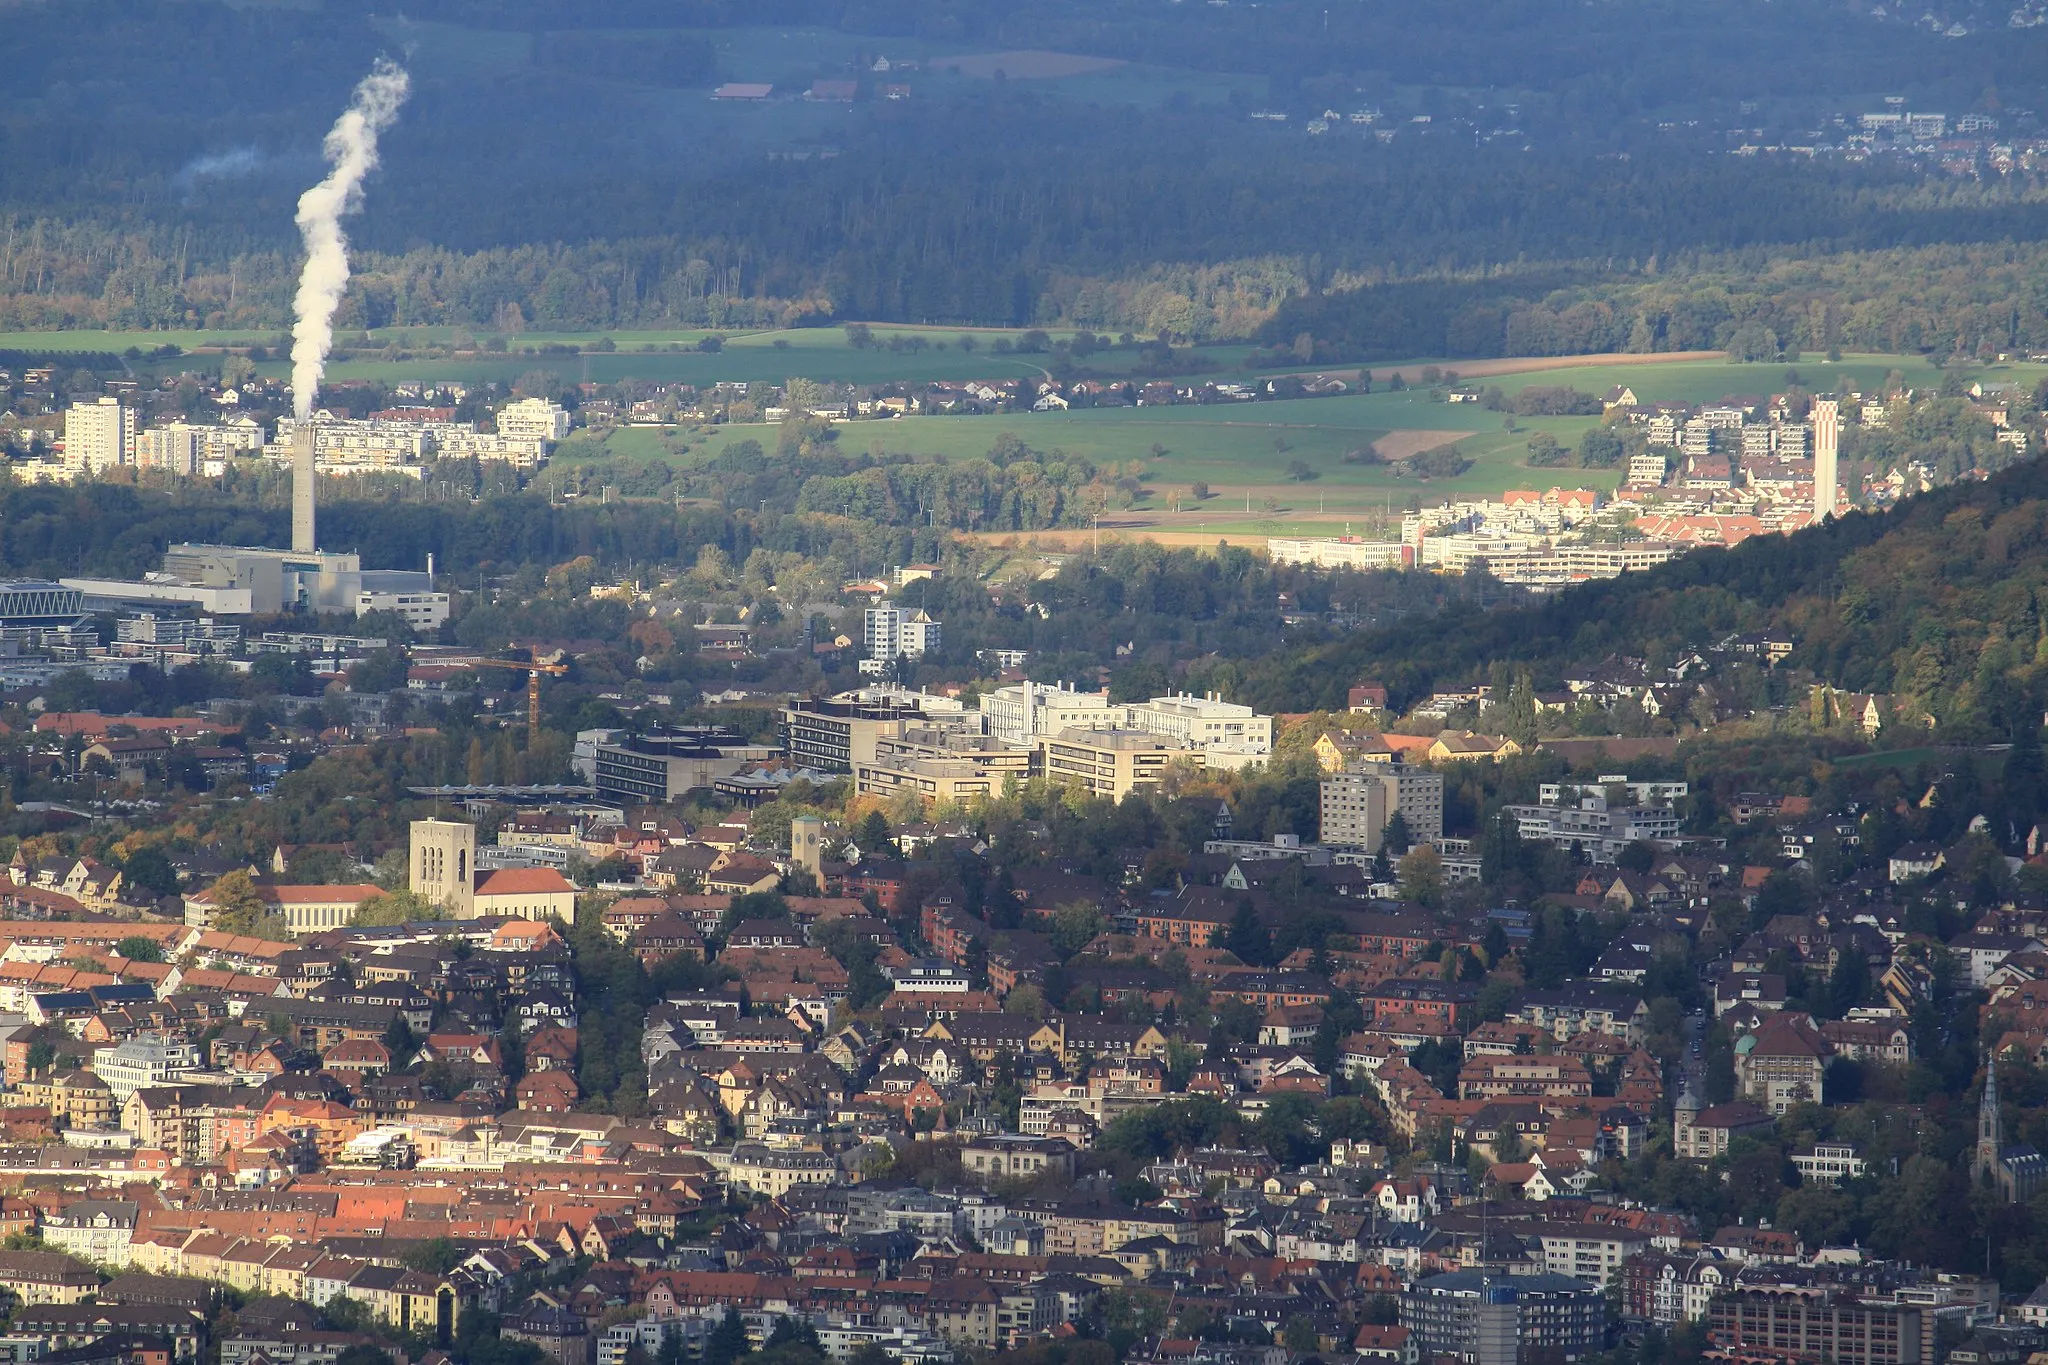 Photo showing: Zürich-Oberstrass, Irchelpark faculty and Oerlikon, as seen from Uetliberg Aussichtsturm, Wallisellen and Opfikon in the background.